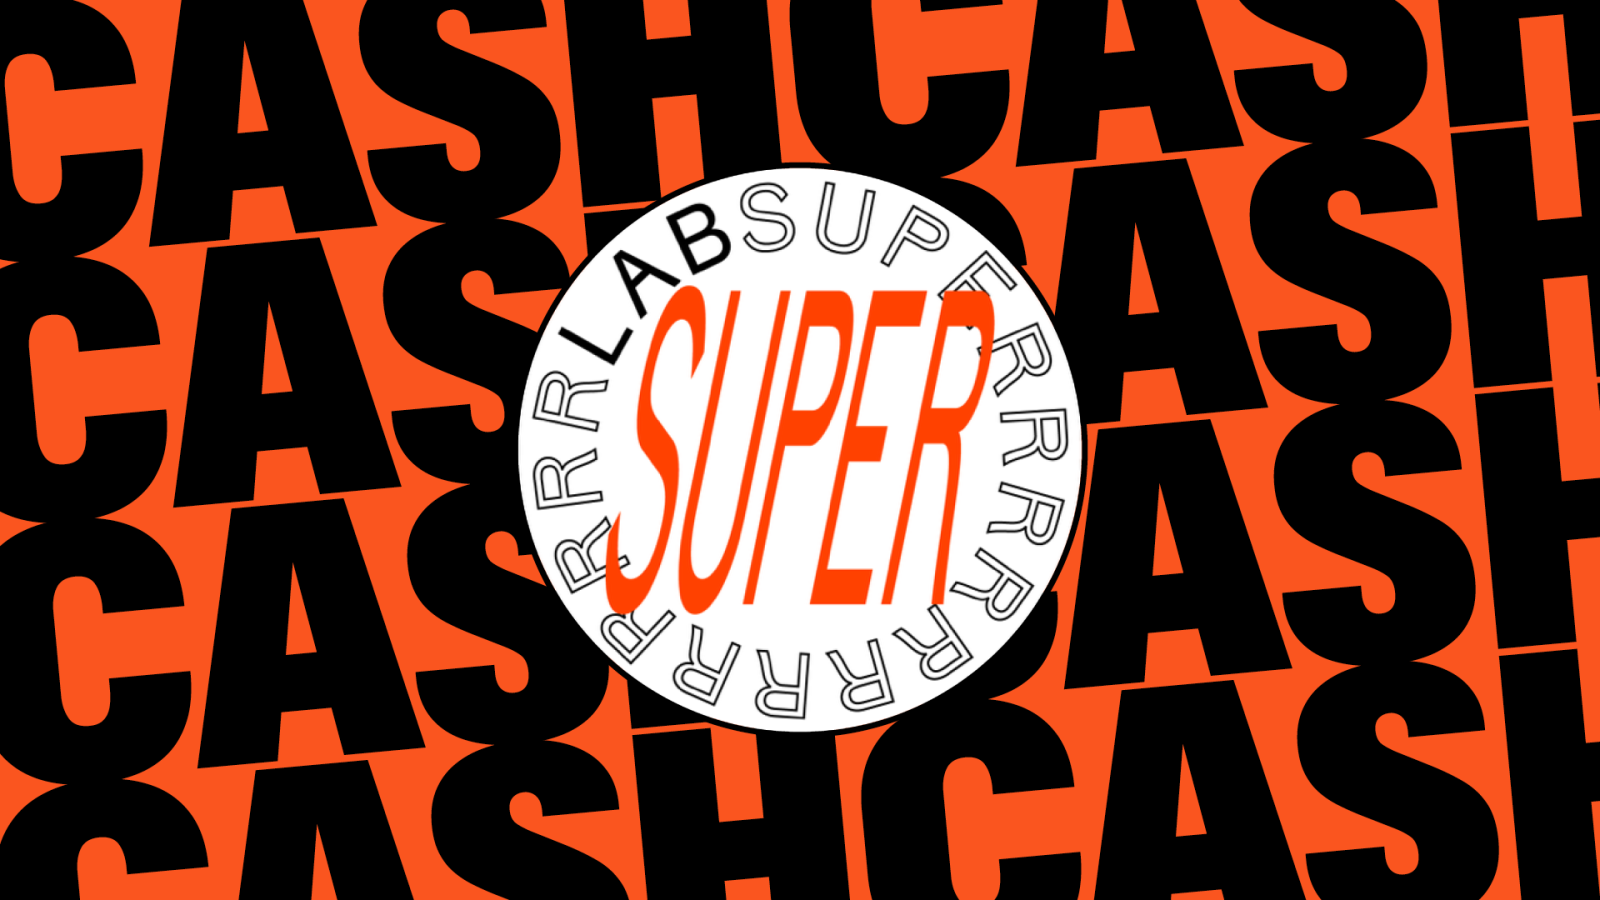 The background of the image shows this year’s republica logo. An orange background with bold black letters that display the word cash. In the middle of the image, the round SUPERRR Lab logo is depicted